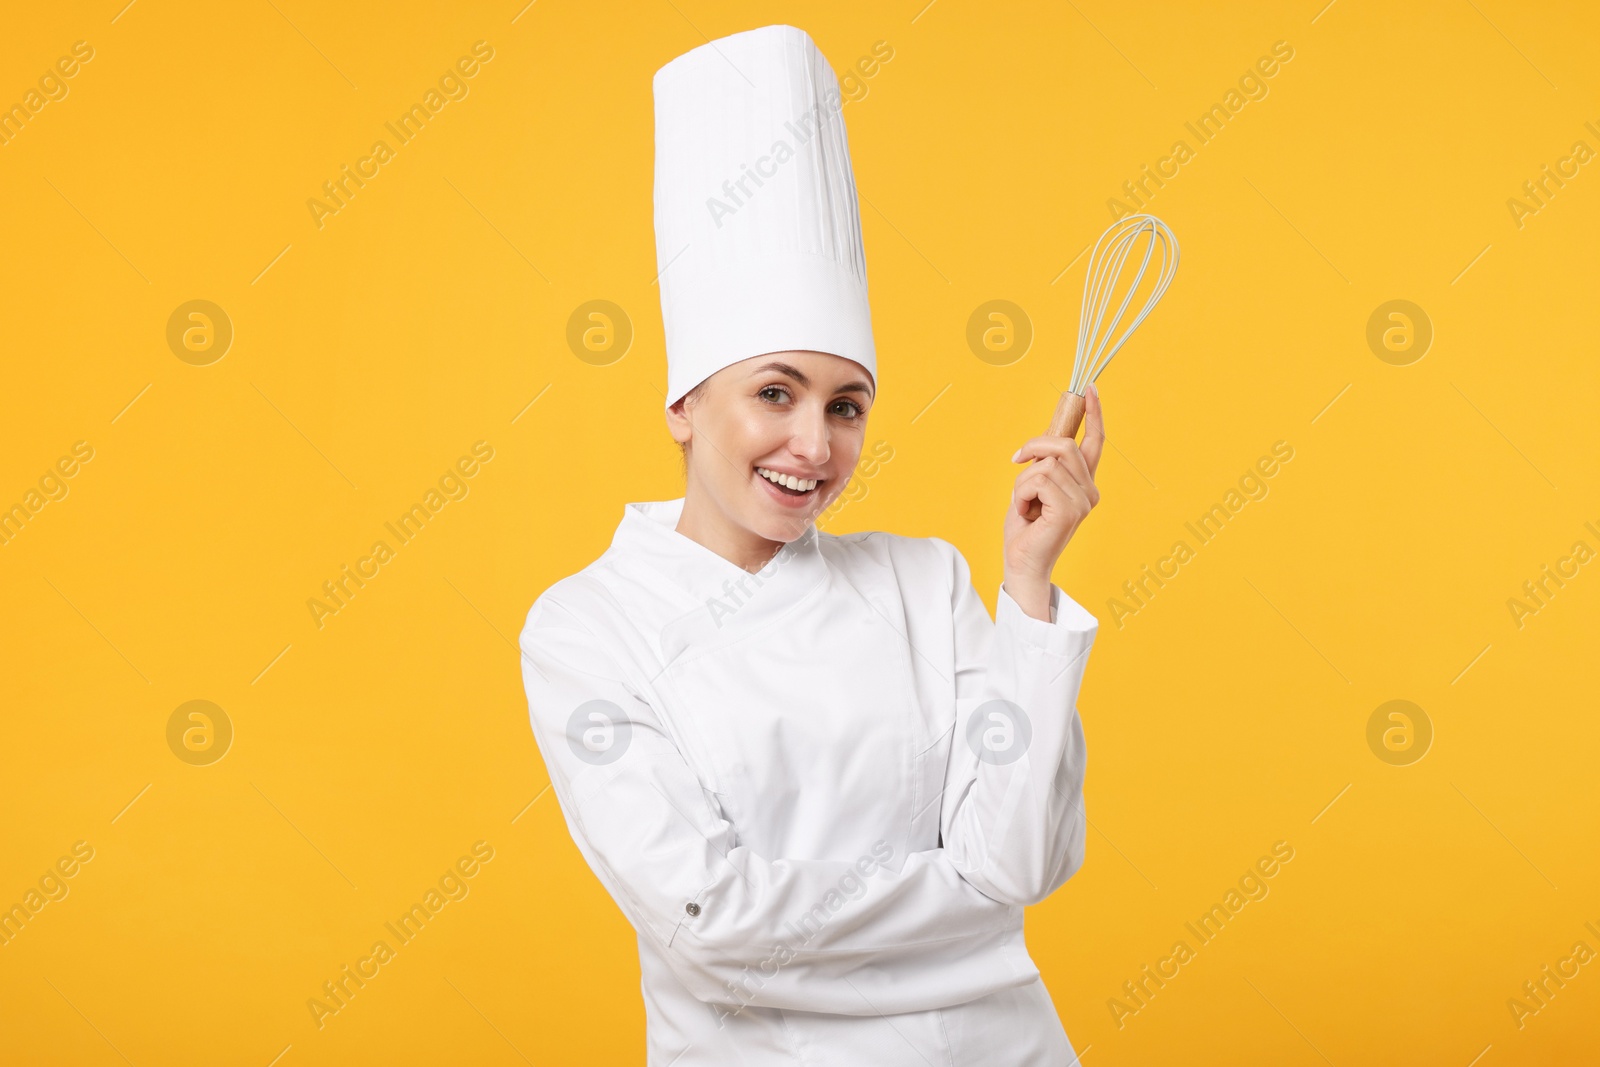 Photo of Happy professional confectioner in uniform holding whisk on yellow background